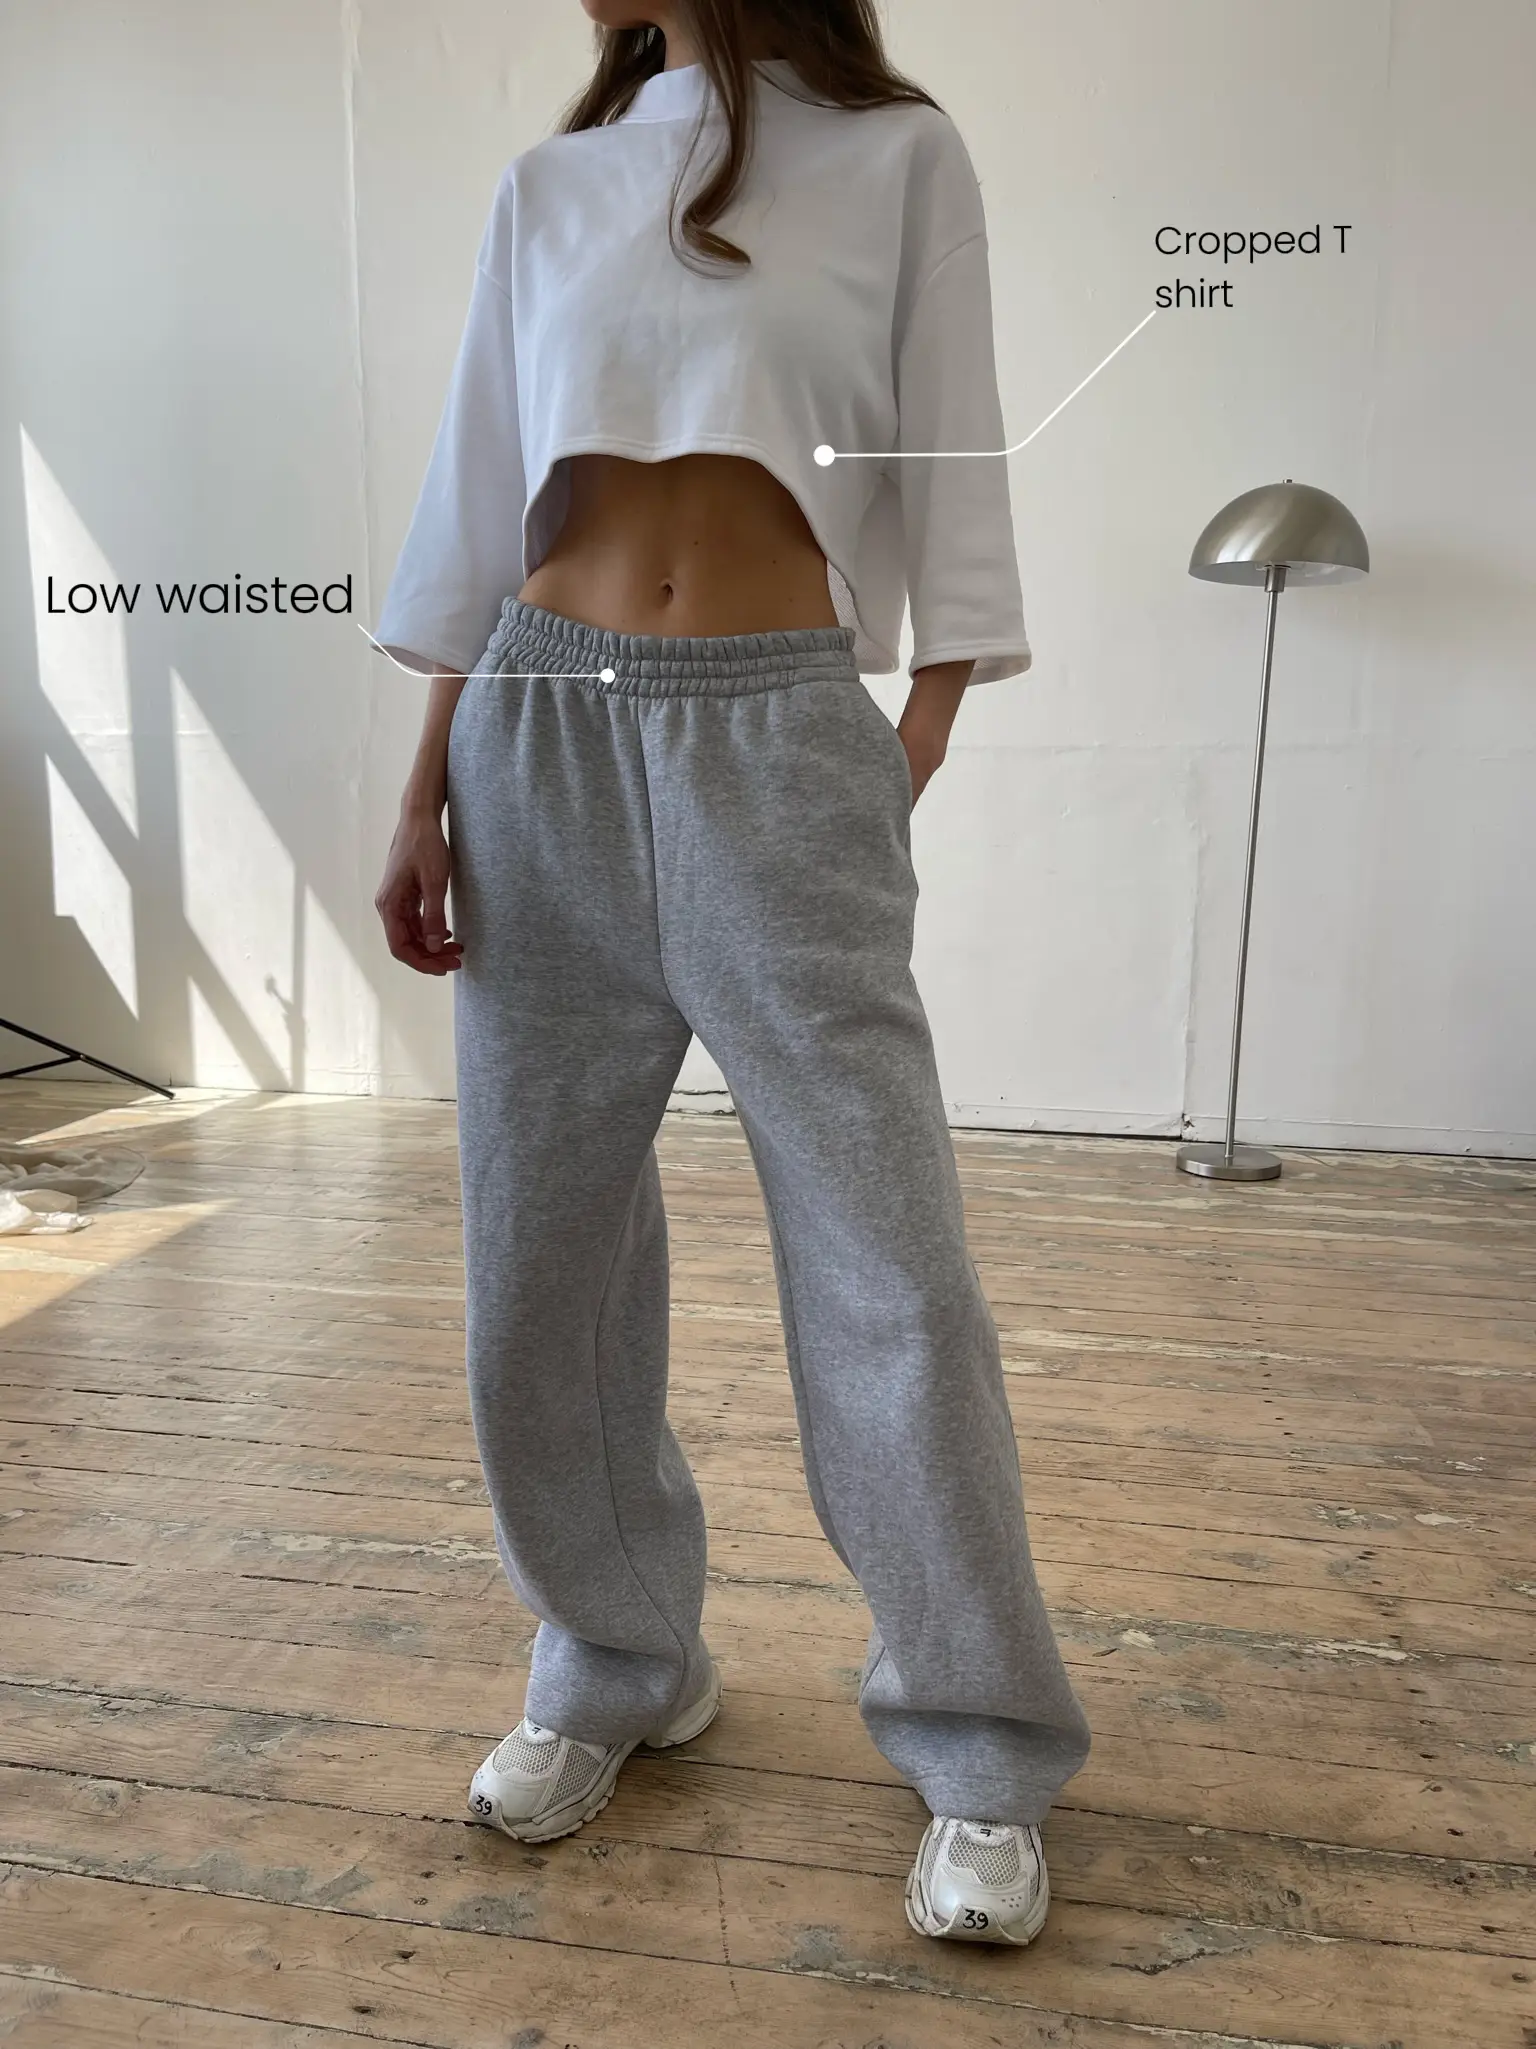 Styling my cosy sweatpants, Gallery posted by Kristine